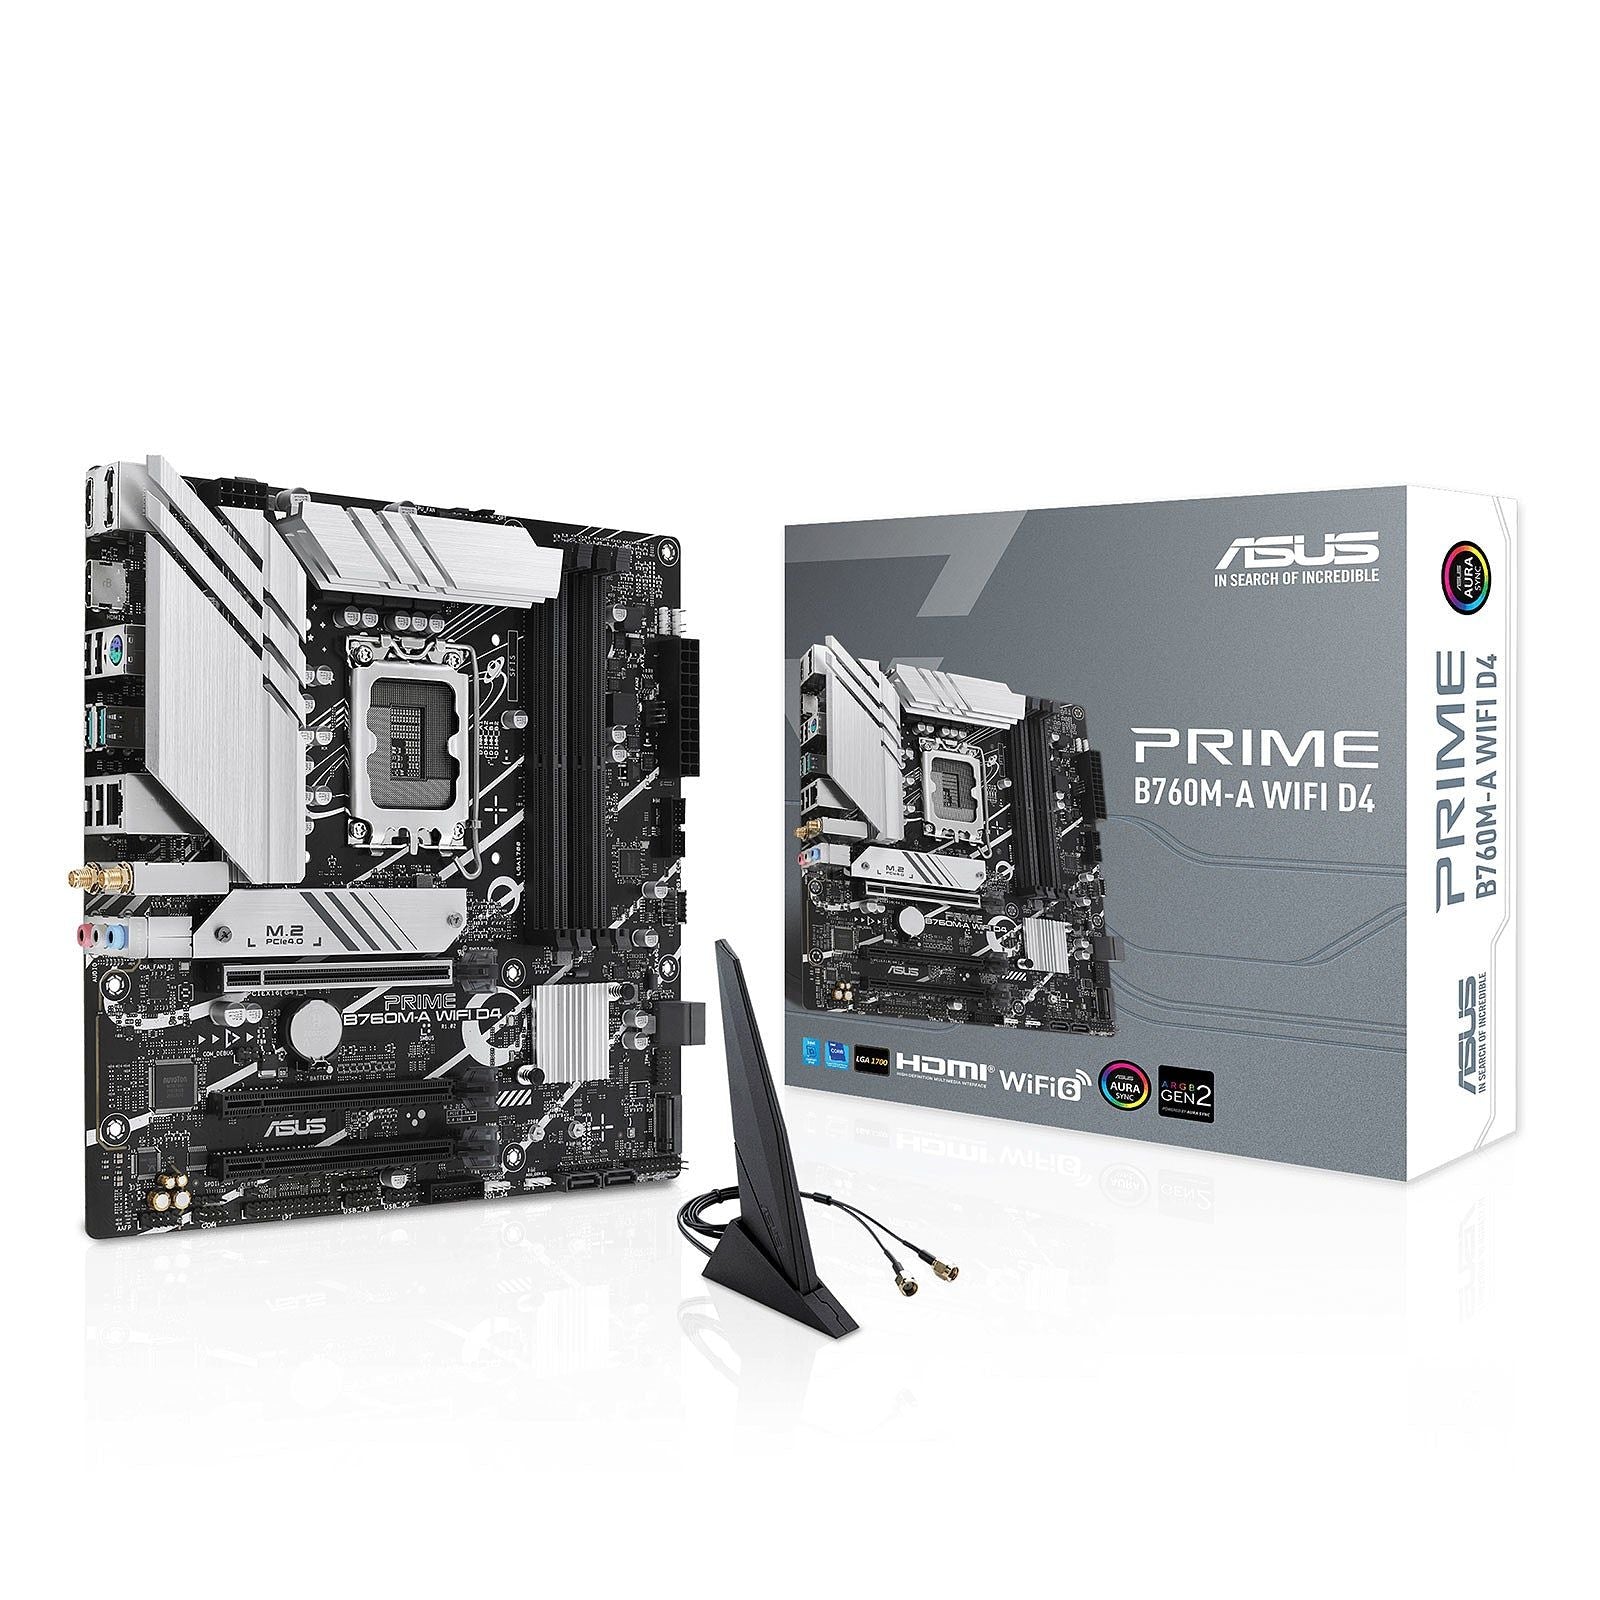 ASUS PRIME B760M-A WIFI D4 - OVERCLOCK Computer